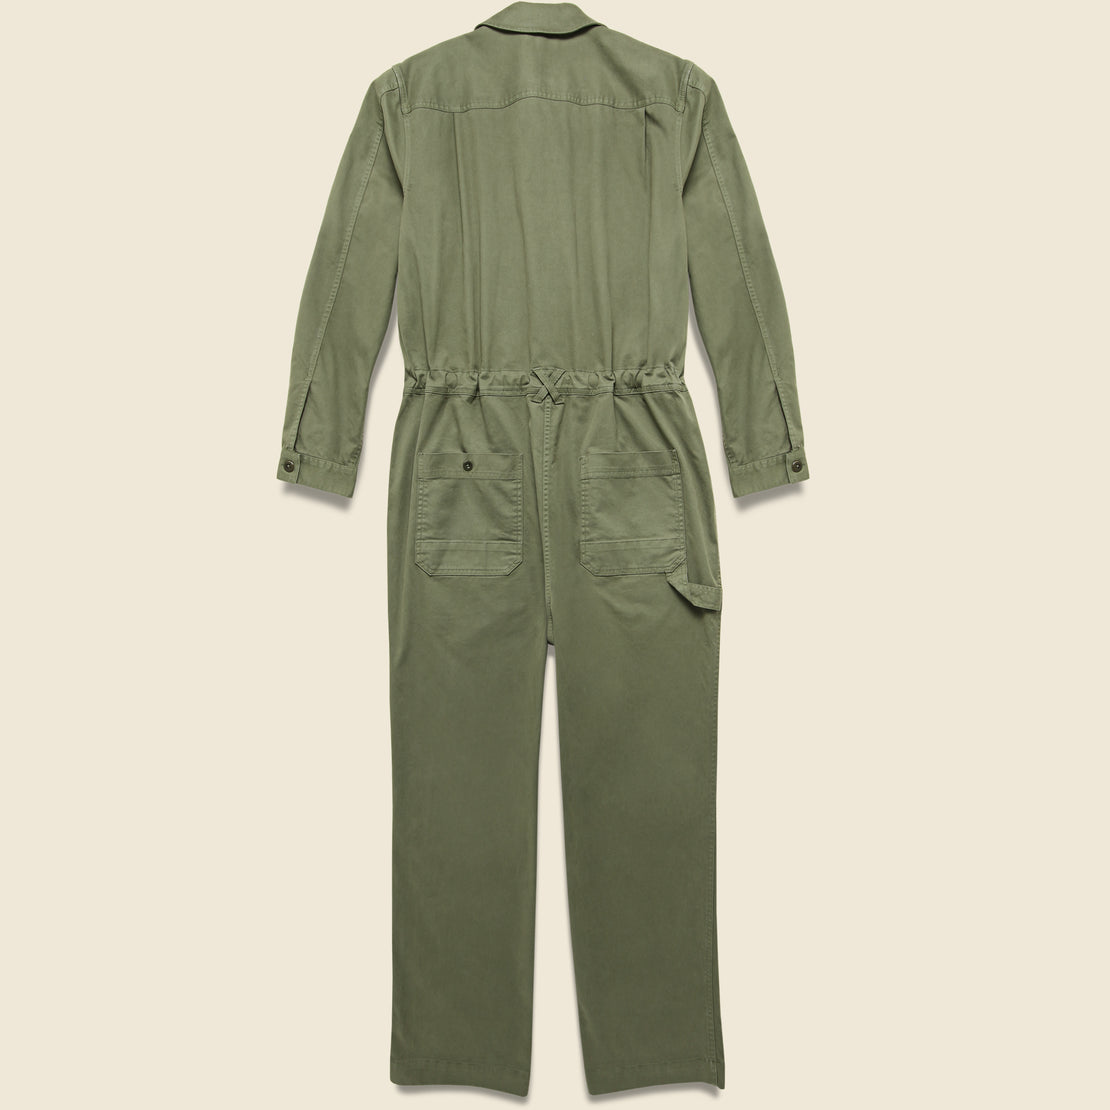 Chino Field Jumpsuit - Olive - Alex Mill - STAG Provisions - Pants - Jumpsuit